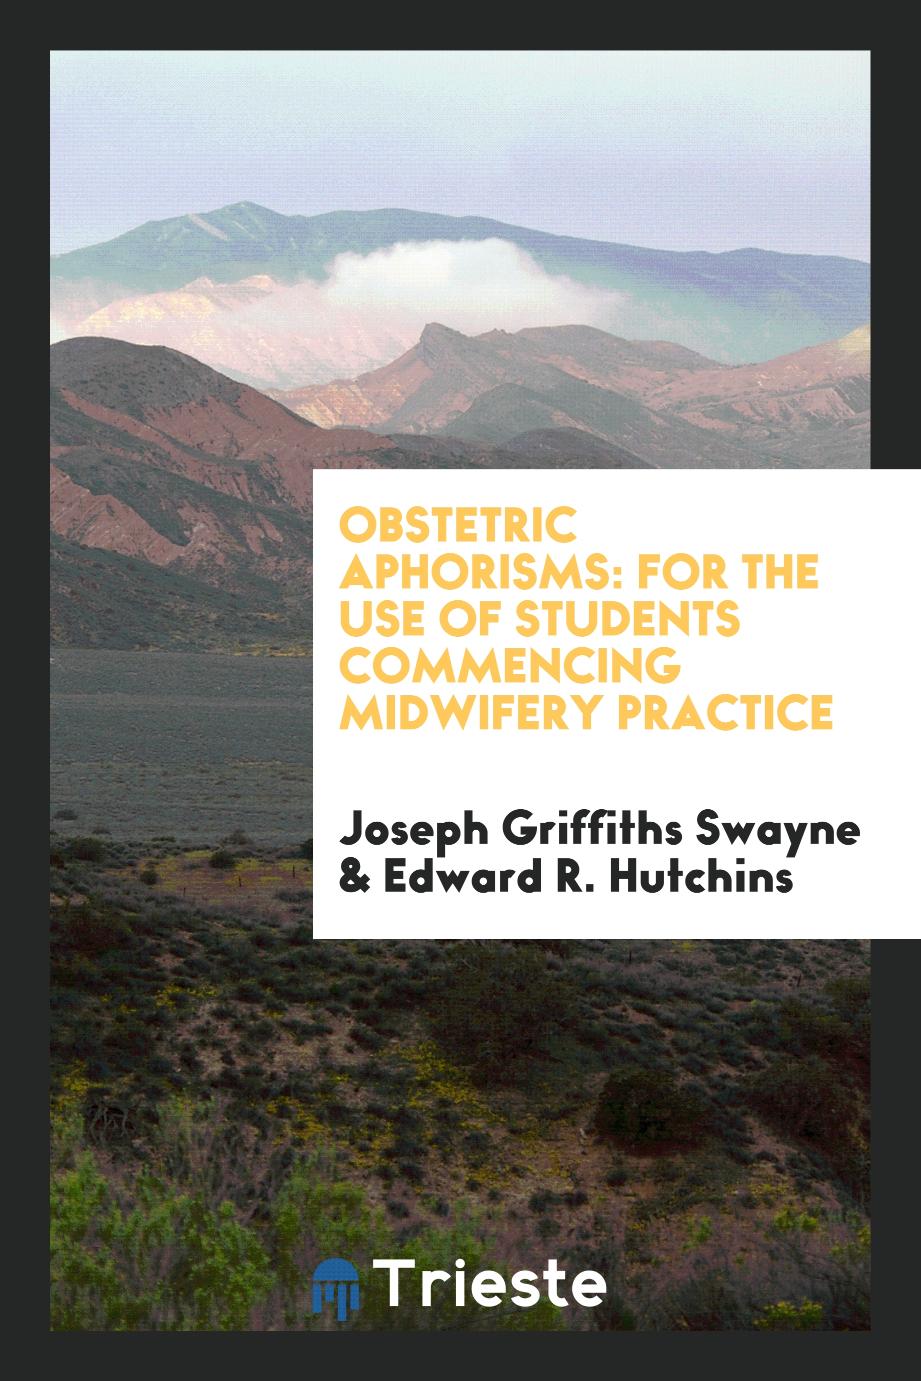 Obstetric aphorisms: for the use of students commencing midwifery practice